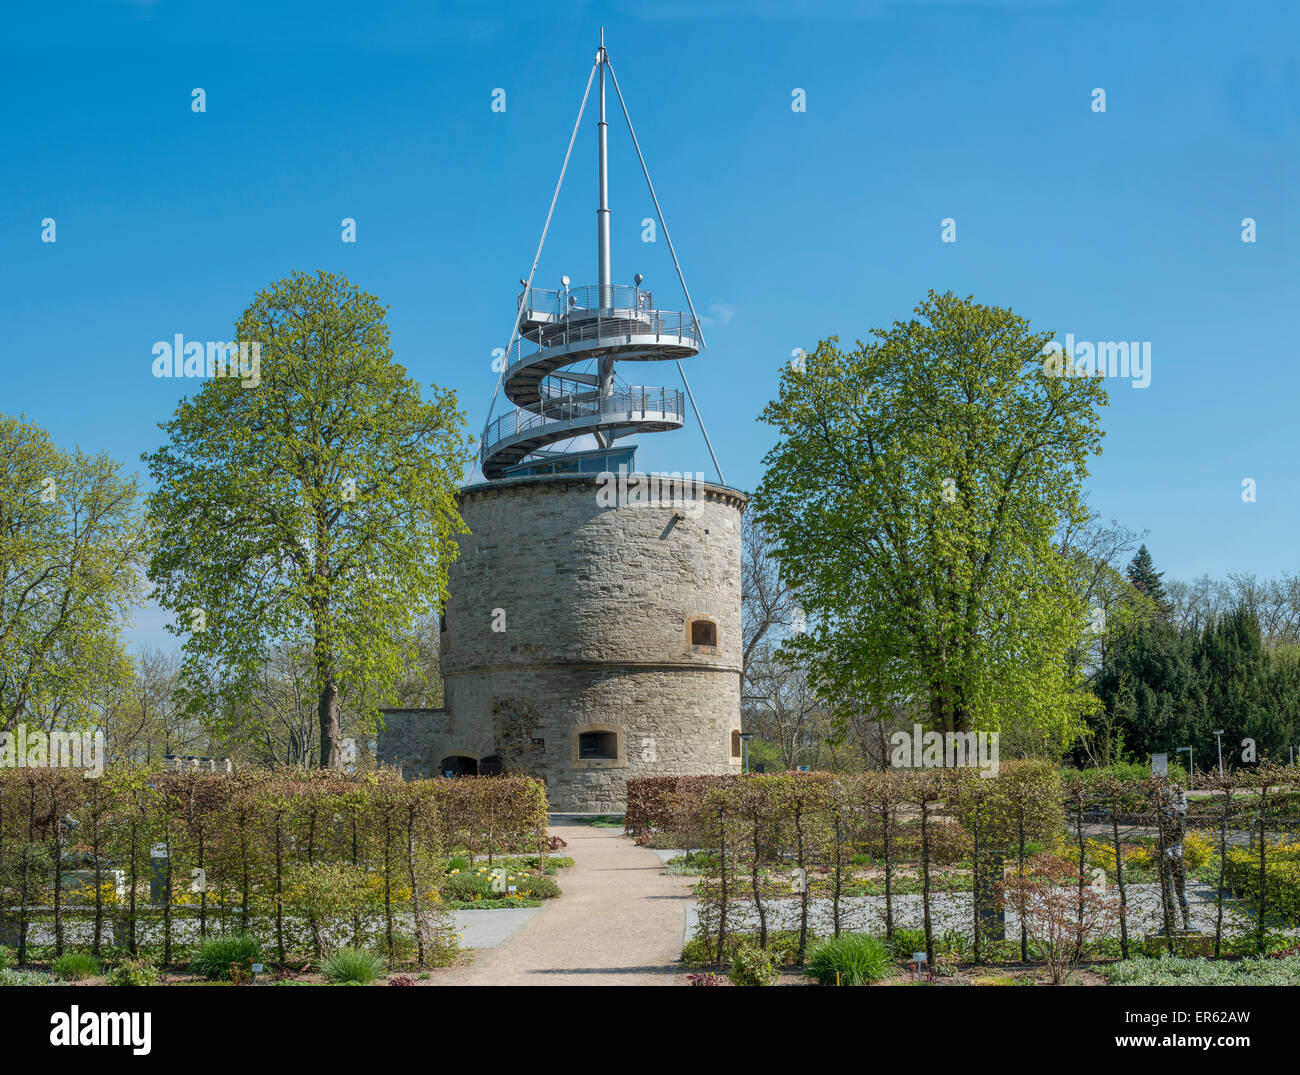 Lookout tower in egapark, 1530 turret of the citadel Cariaksburg, built on to in 1999, BUGA 2021, Erfurt, Thuringia, Germany Stock Photo